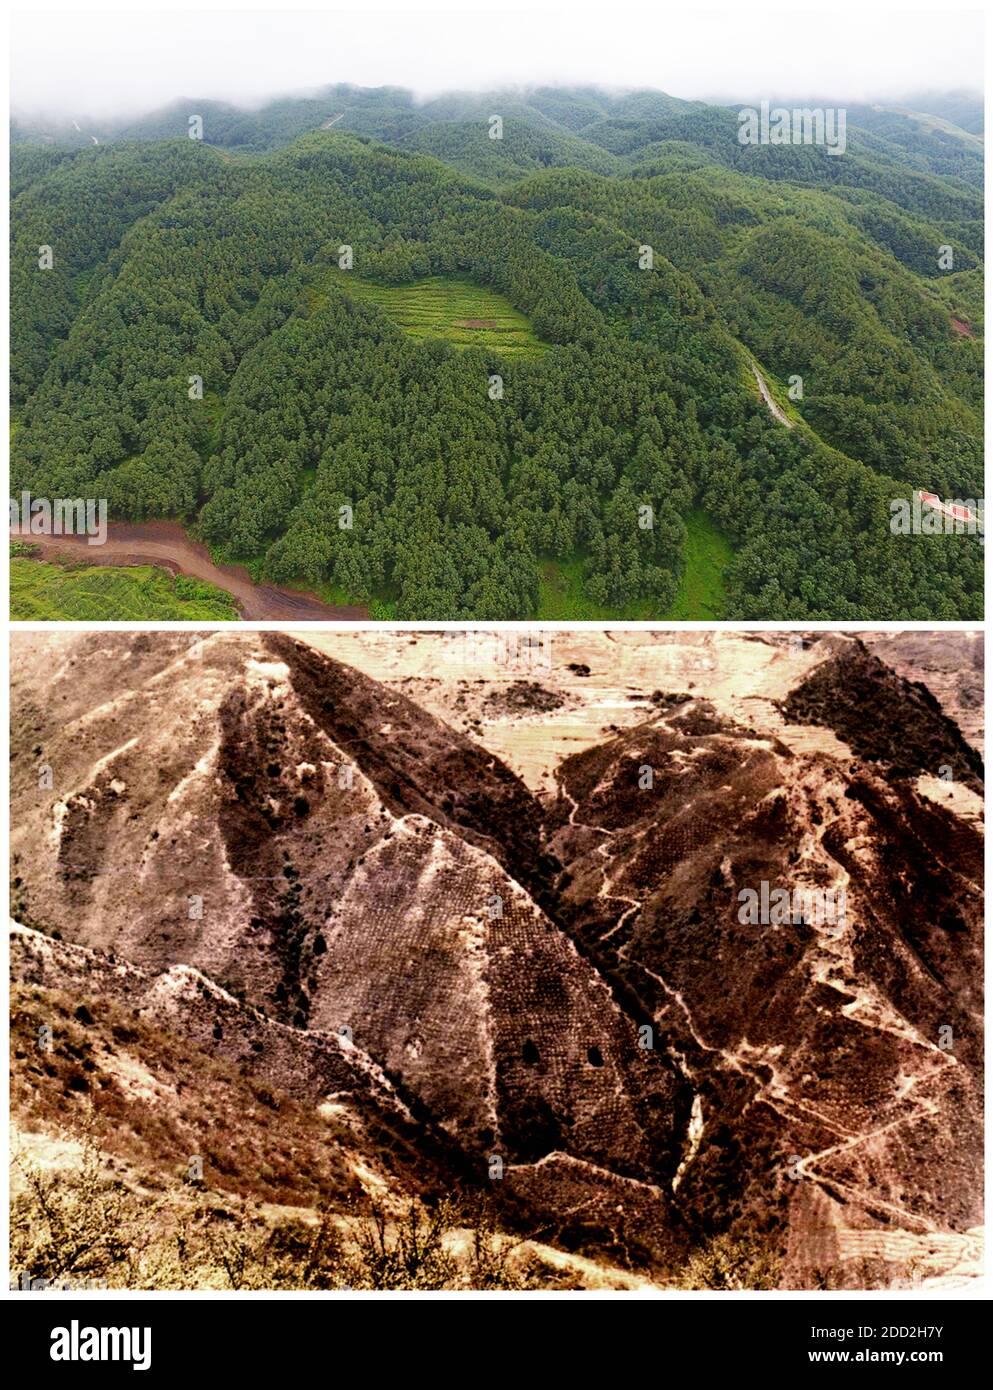 (201124) -- GUIYANG, Nov. 24, 2020 (Xinhua) -- In this combo photo, the upper part taken by Yang Wenbin on July 25, 2019 shows the aerial view of the slopes of Haique Village and the lower file photo shows the slope of Haique Village with rocky desertification in 1980s, in Hezhang County, southwest China's Guizhou Province. China has achieved the feat of removing all remaining counties from the country's poverty list. The last nine impoverished counties, all in southwest China's Guizhou Province, have eliminated absolute poverty, the provincial government announced on Monday. This means tha Stock Photo